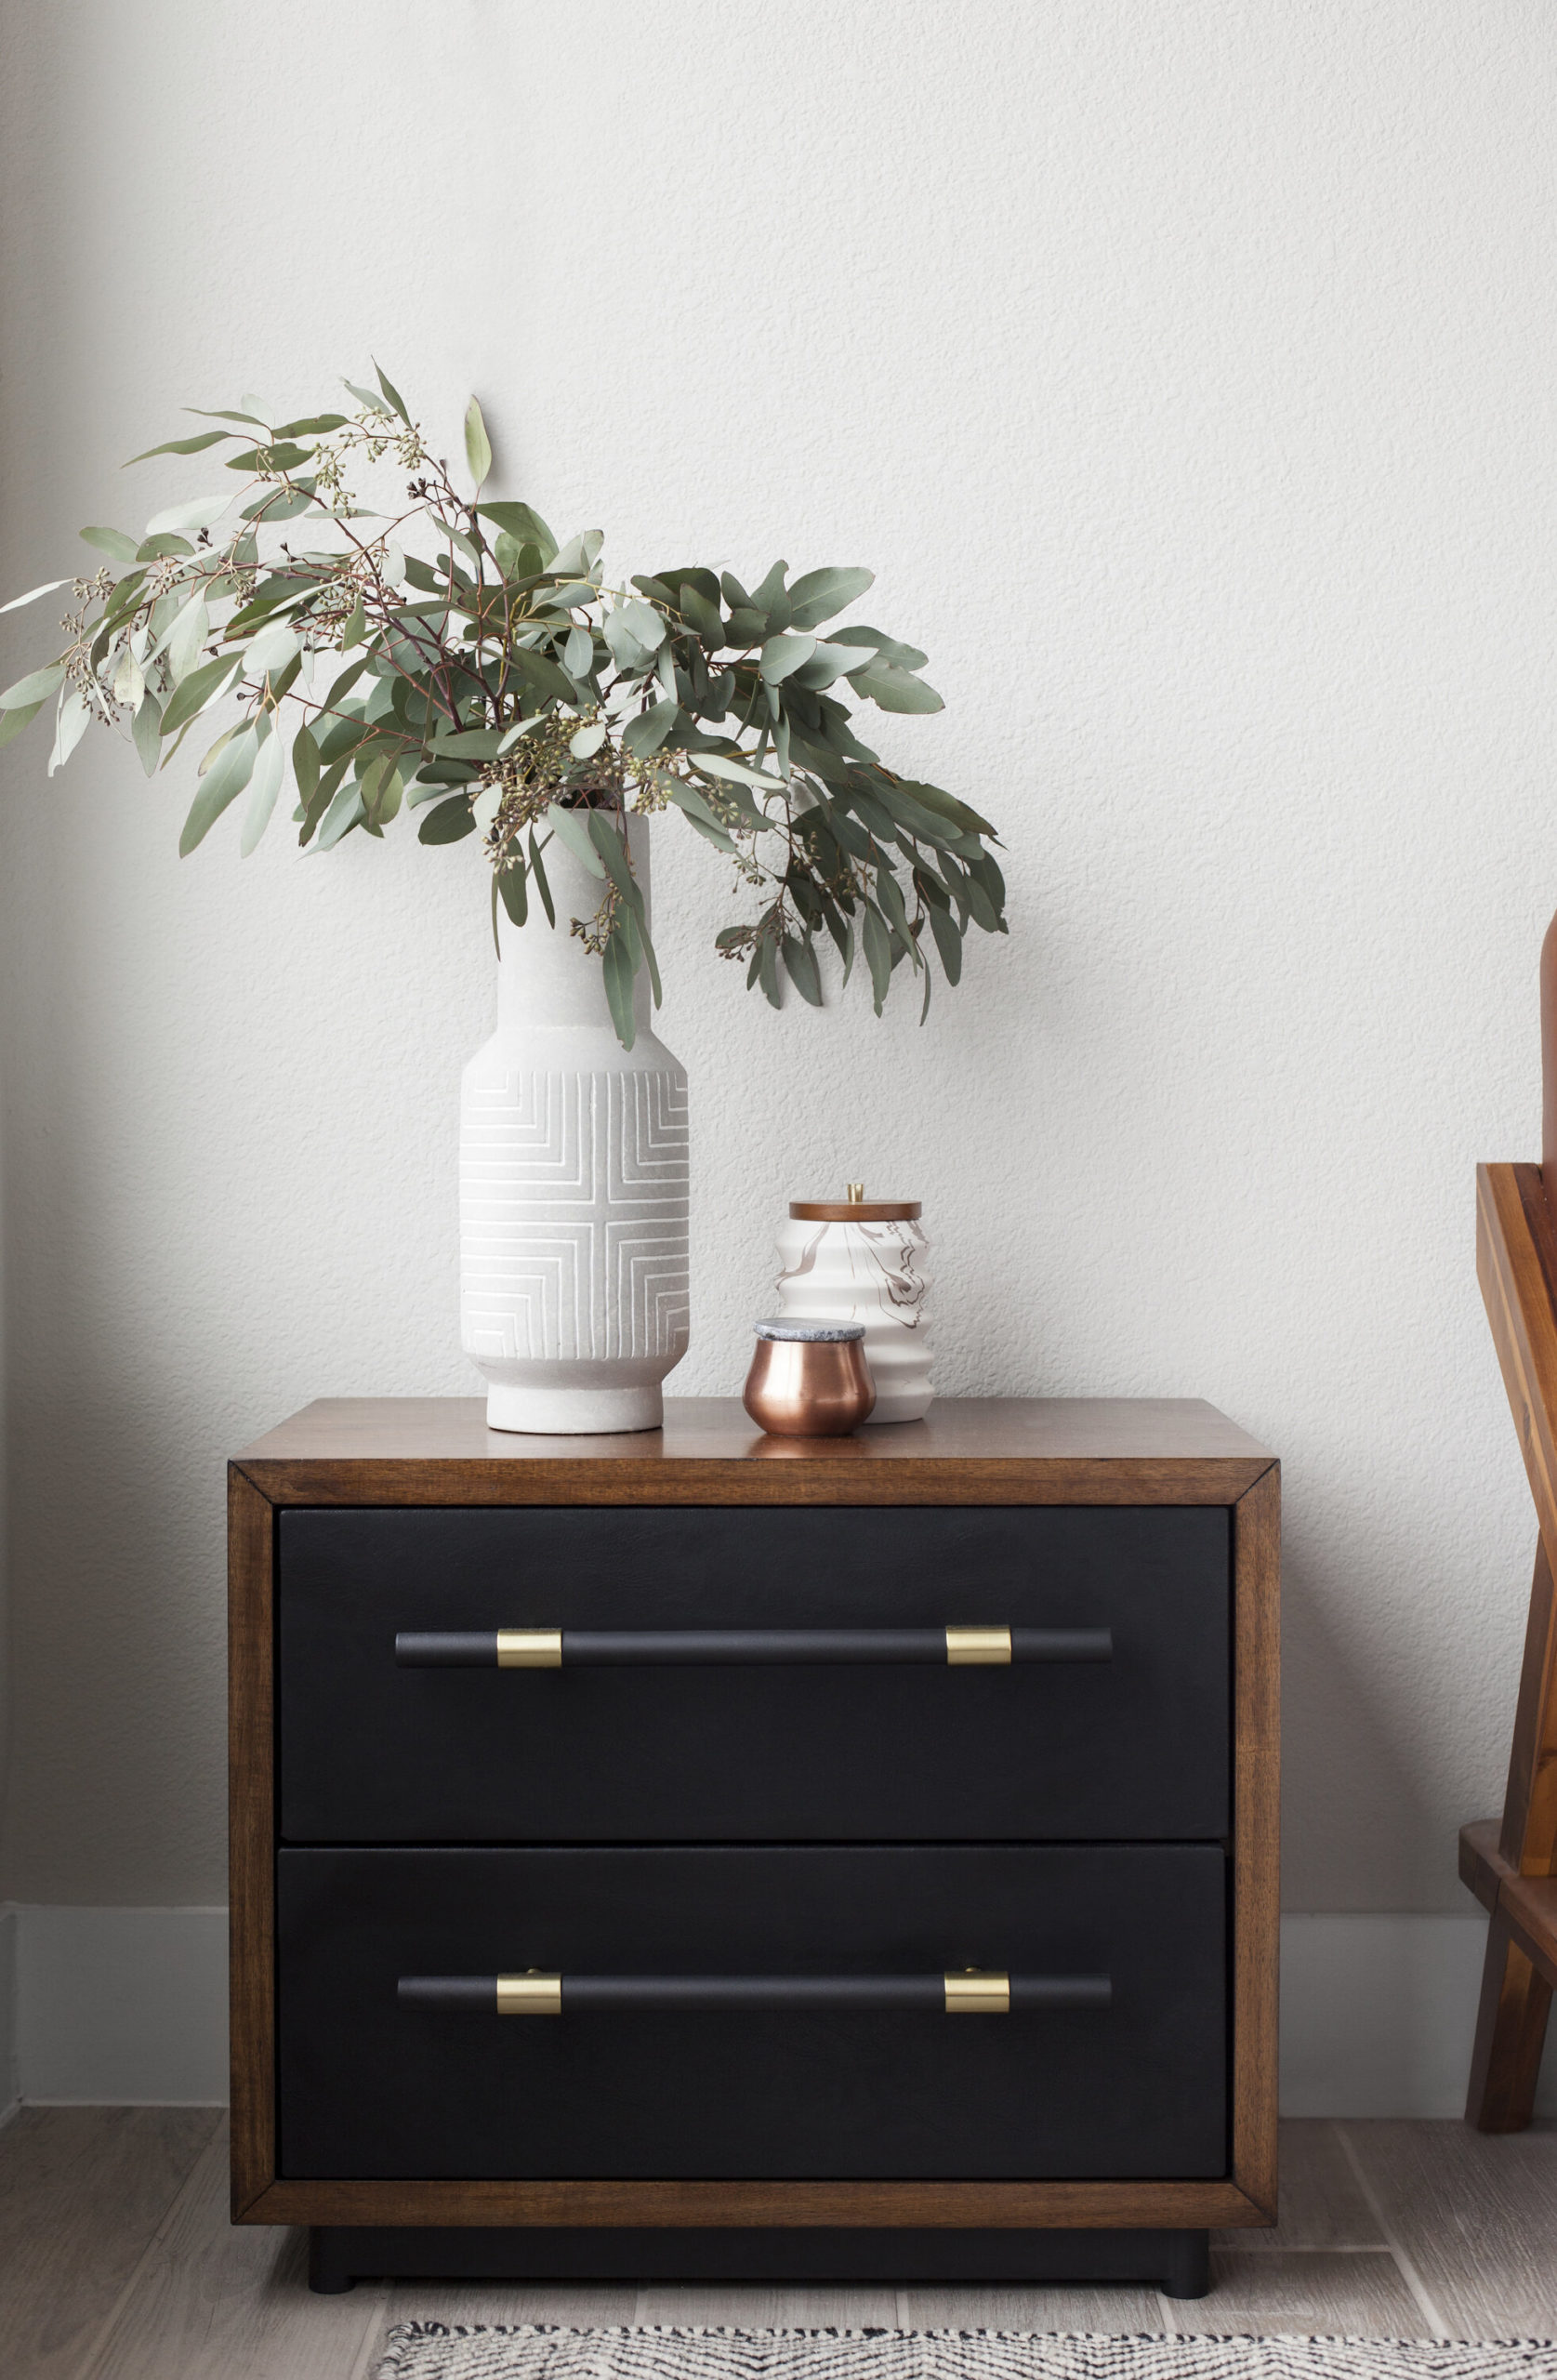 Nightstands // Vase (similar) // Candle // Marble Canister (similar)